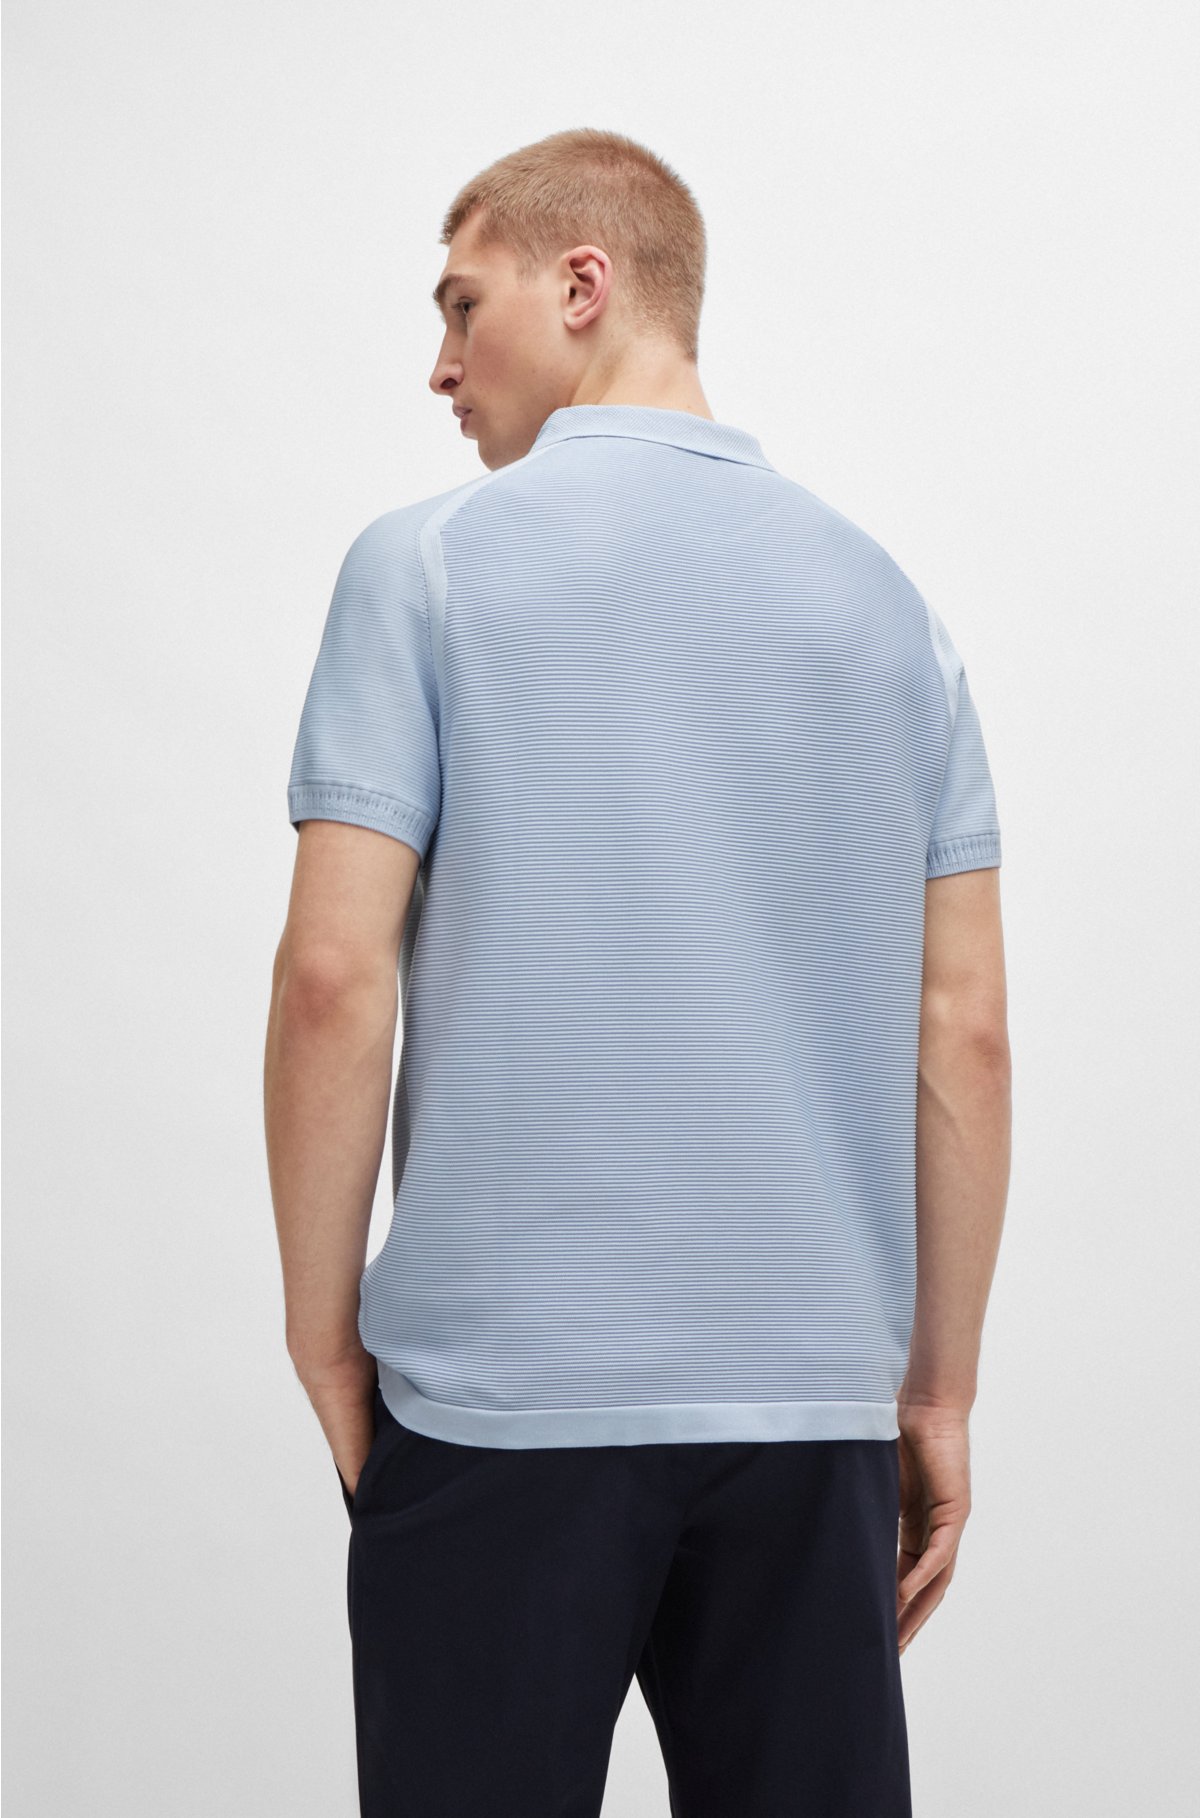 Short-sleeved zip-neck polo sweater with logo detail, Light Blue